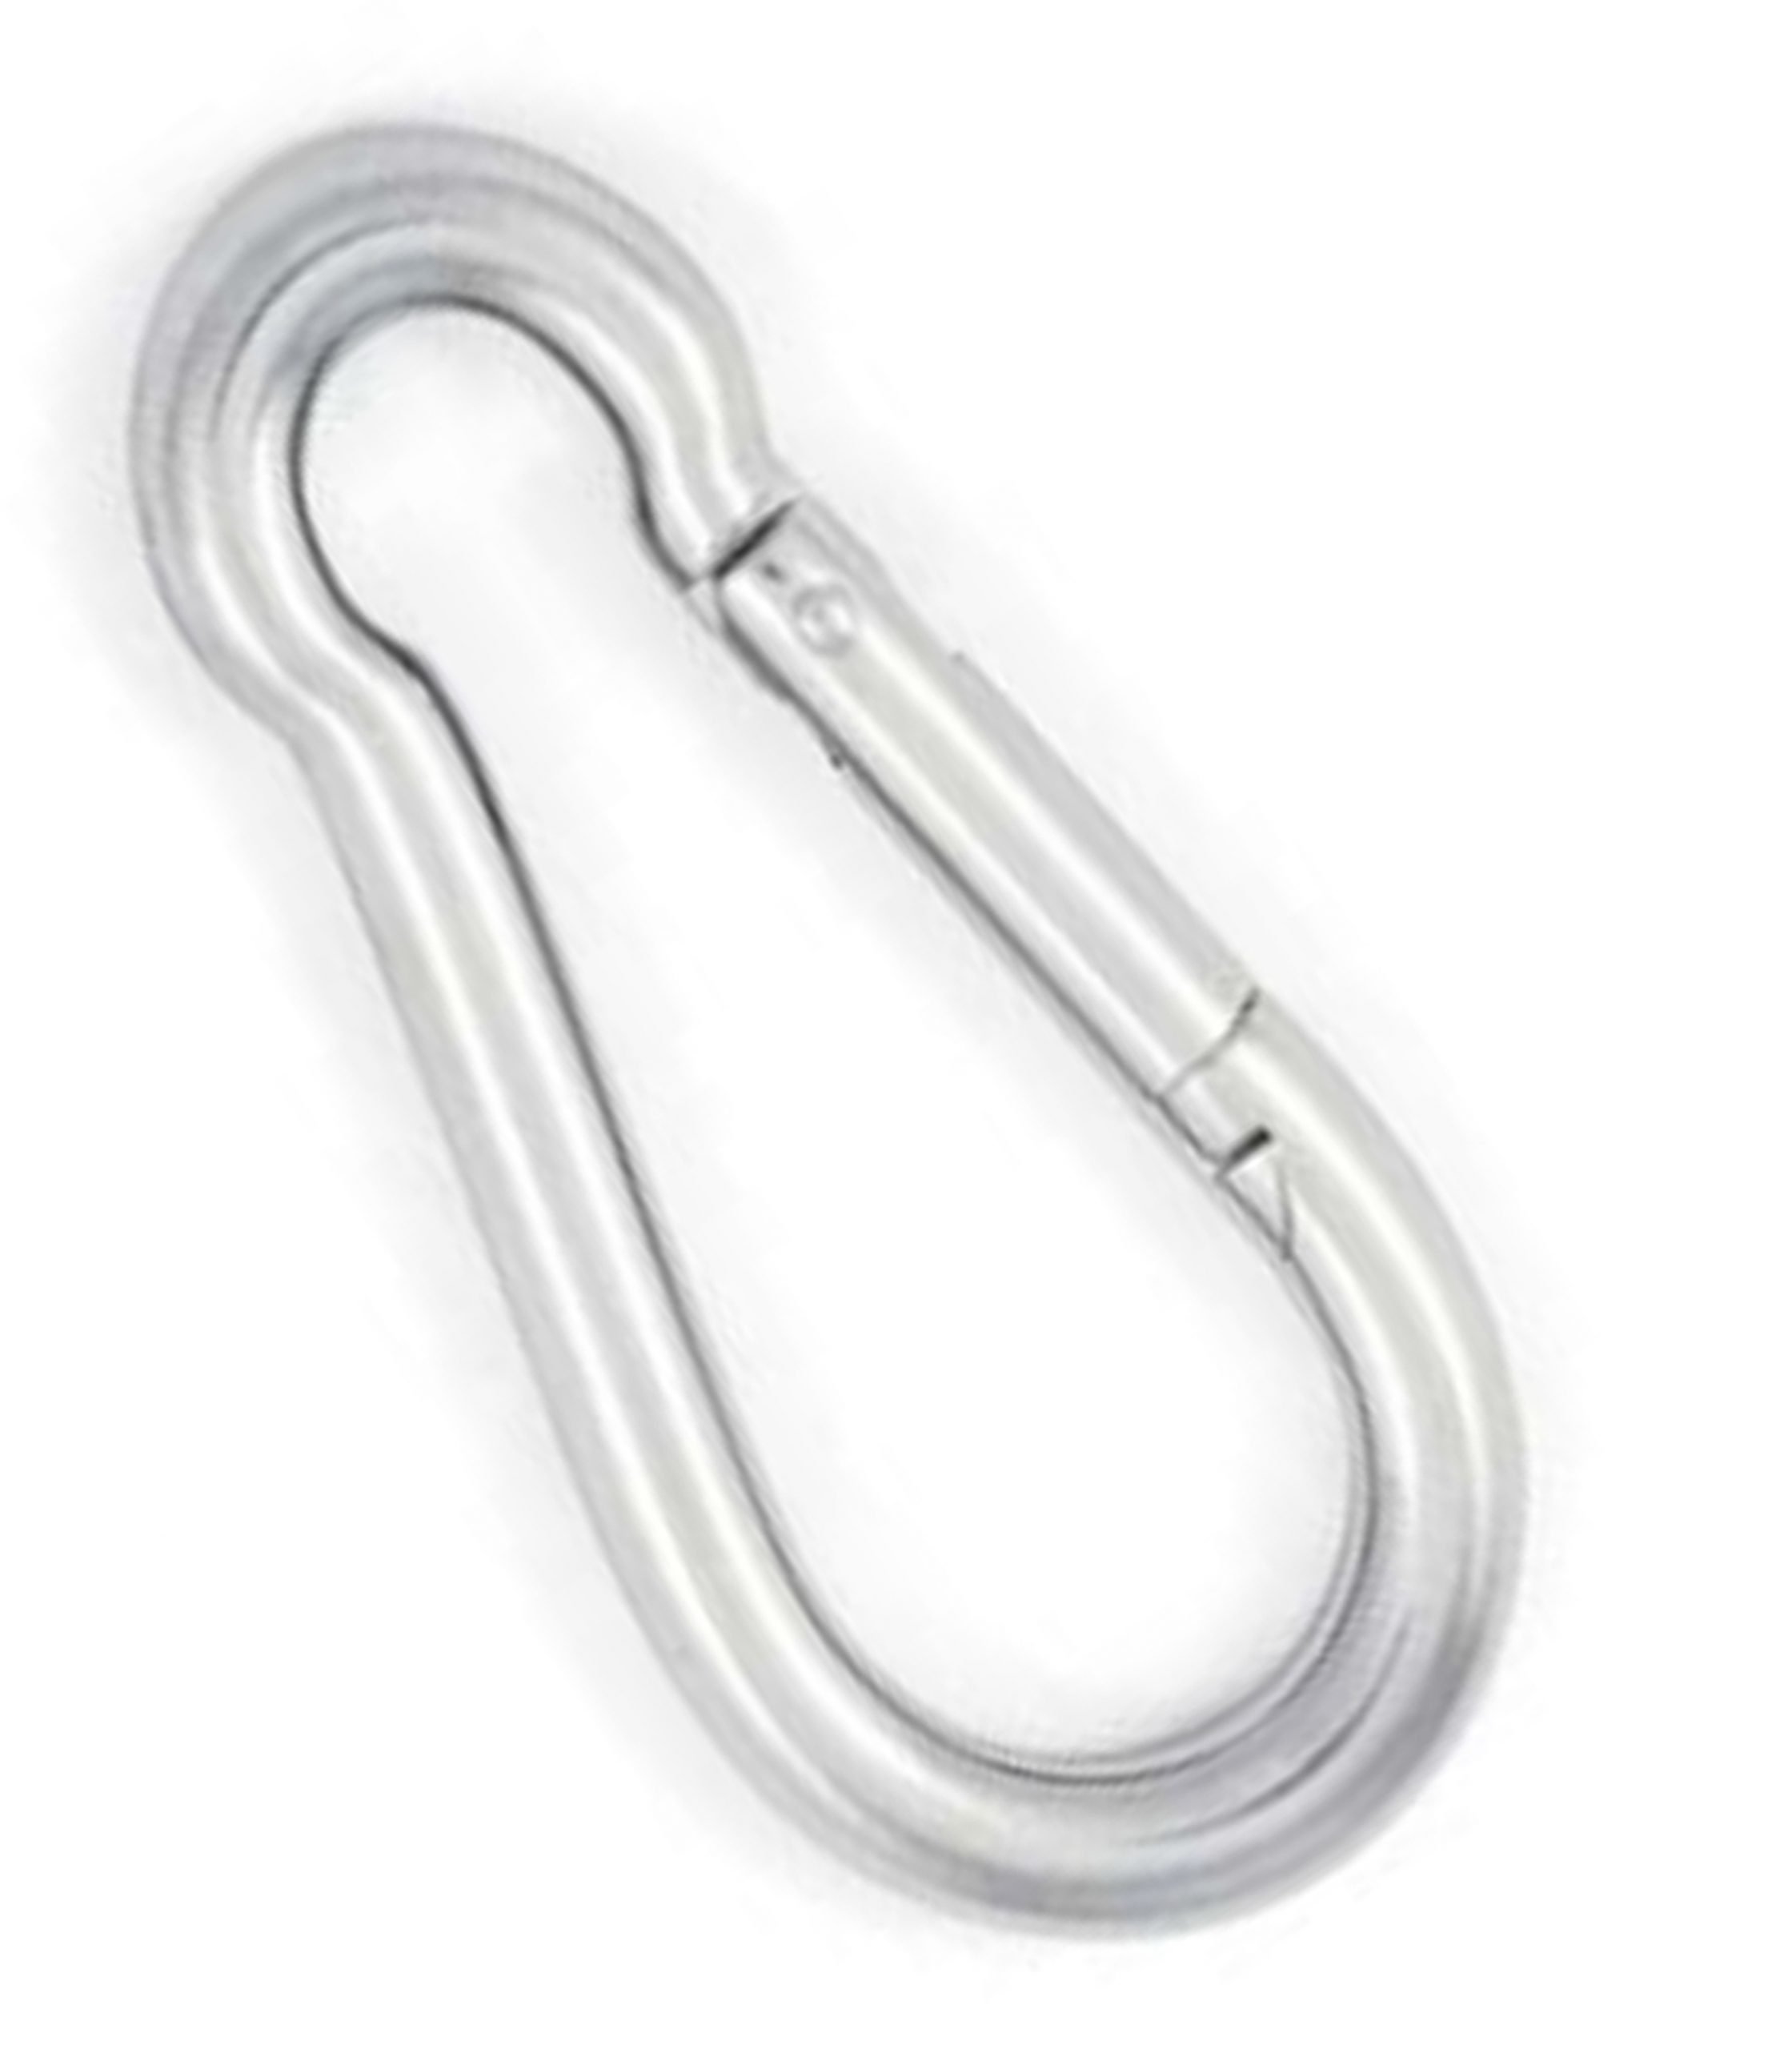 Carabiner Clip Snap Hook Spring Loaded A4 Stainless Steel Carbina